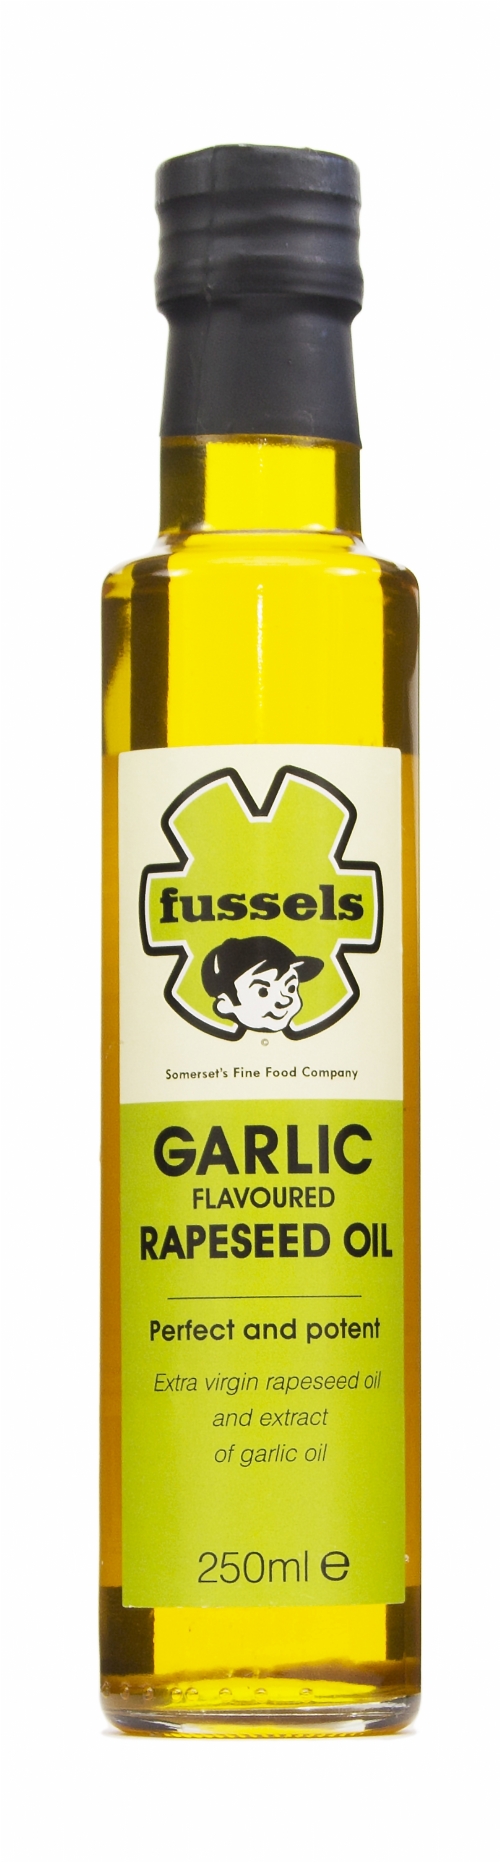 FUSSELS Garlic Flavoured Rapeseed Oil 250ml